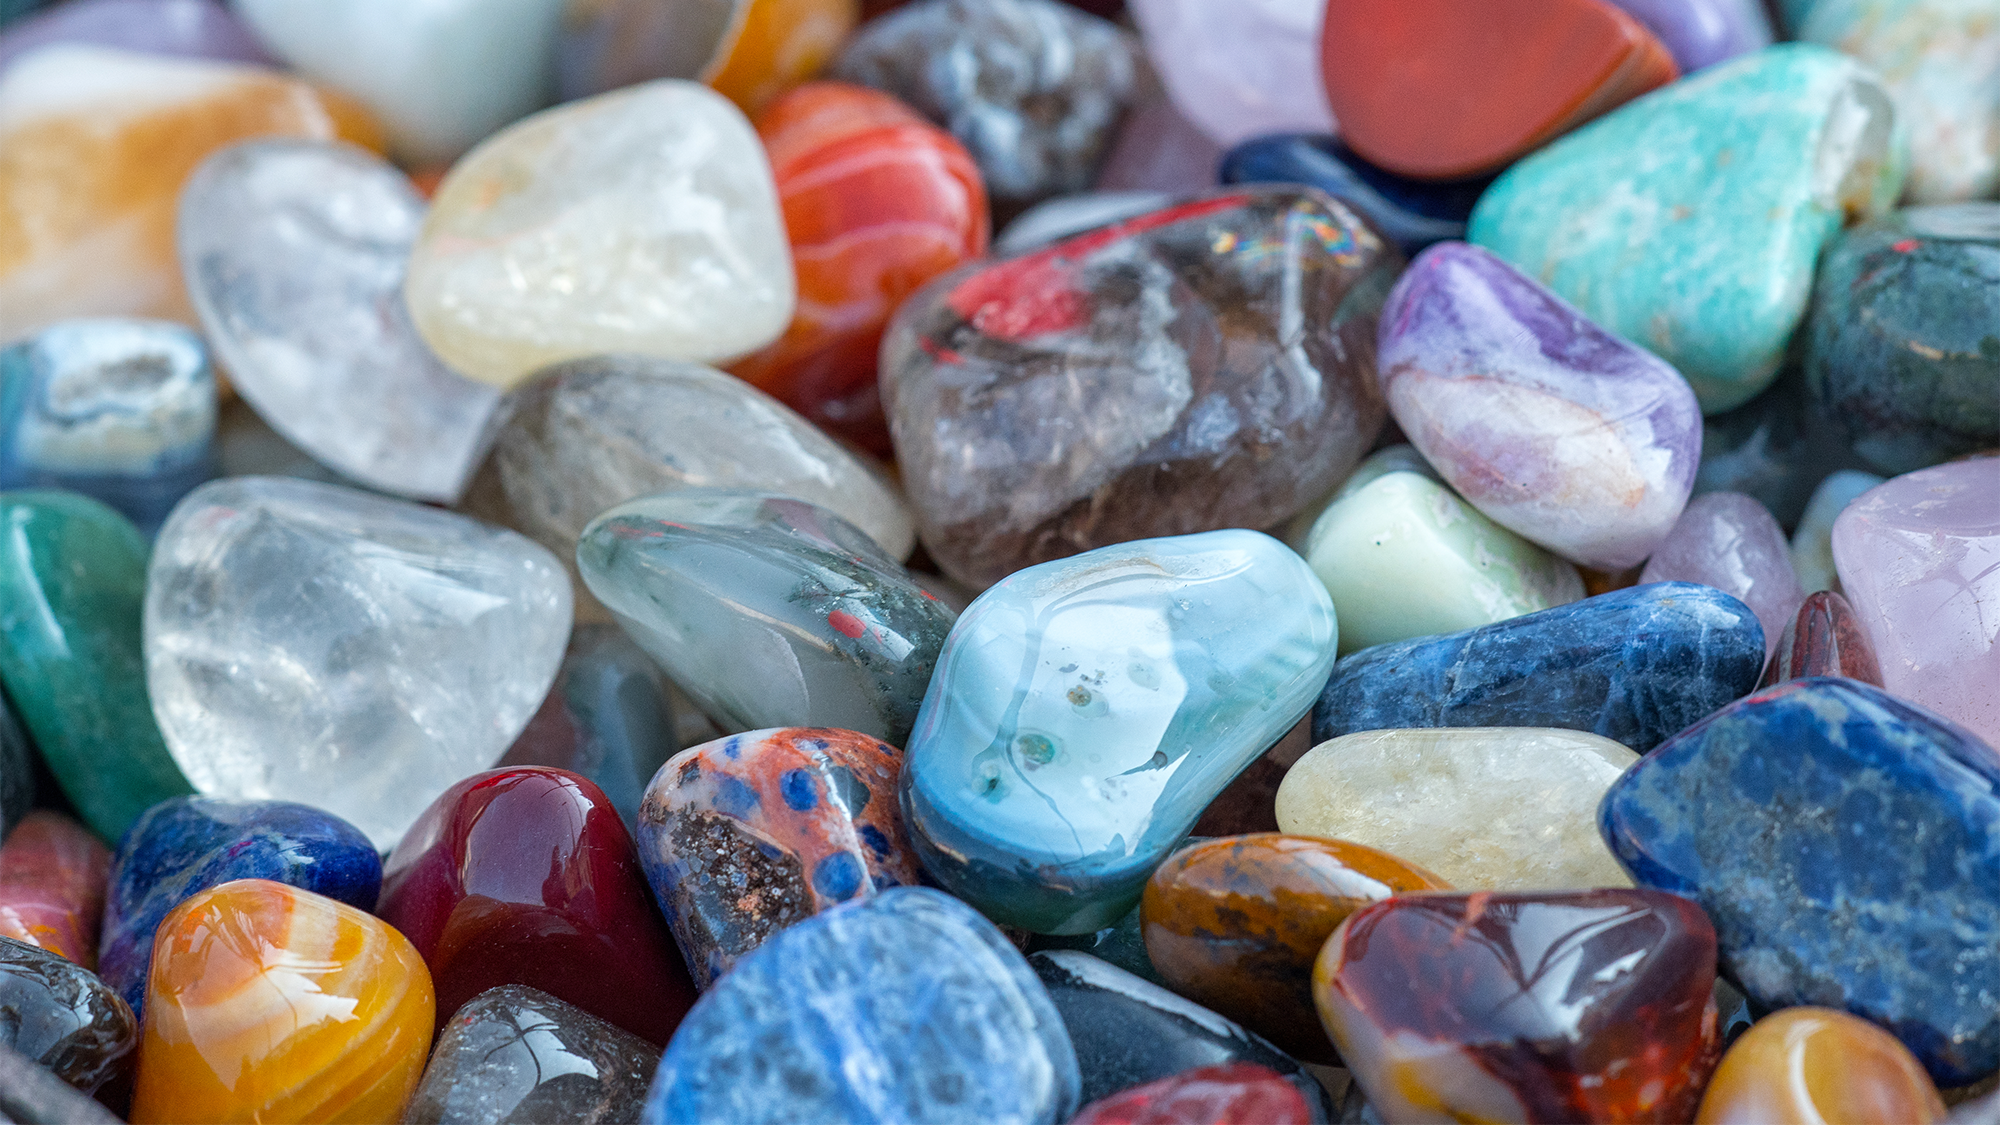 Gemstones carry the tale of their geographic origins